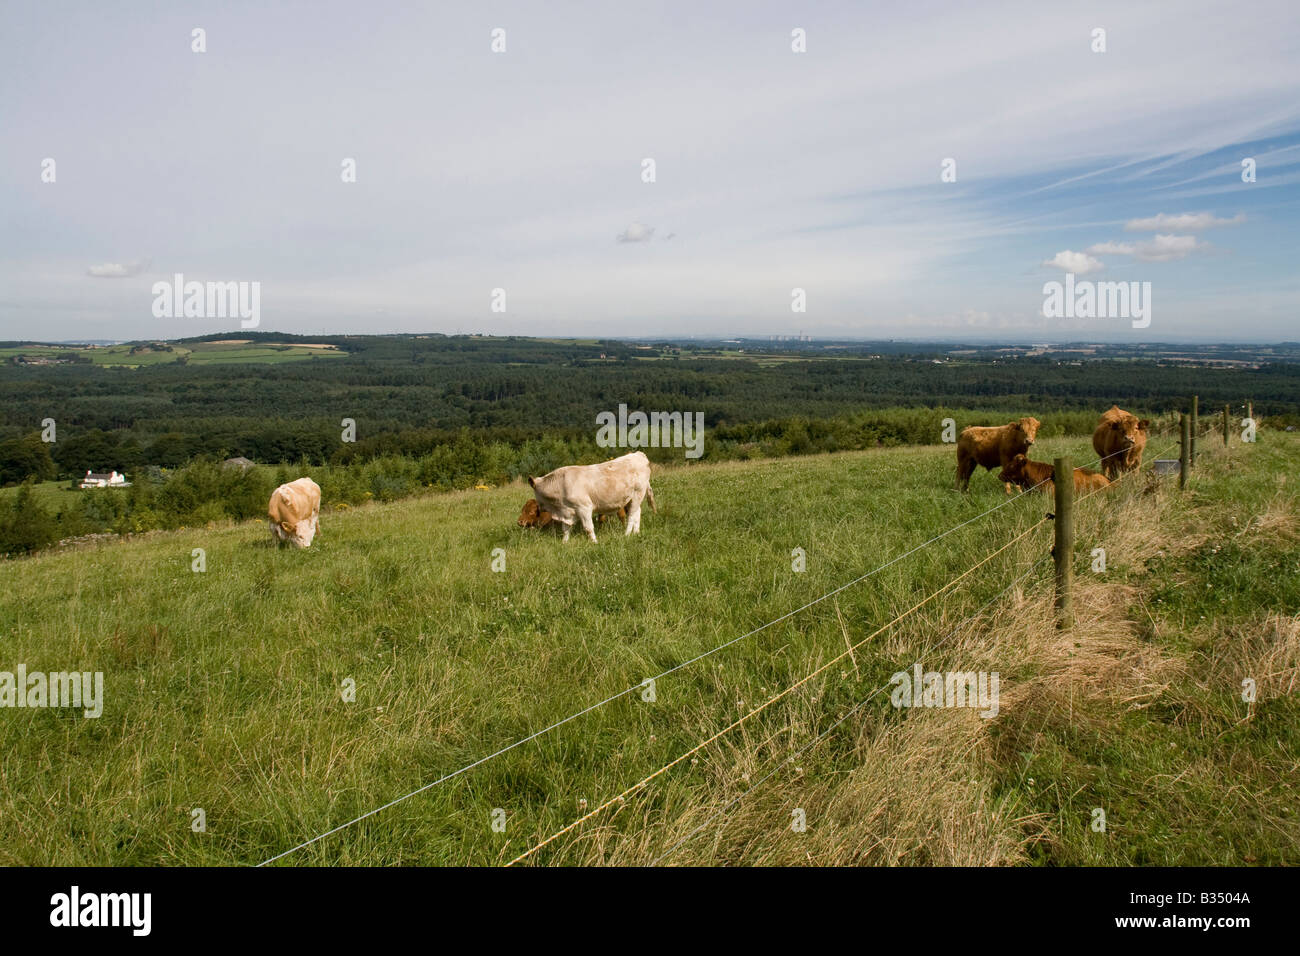 View overlooking Delamere Forest Park, Cheshire with cows Stock Photo